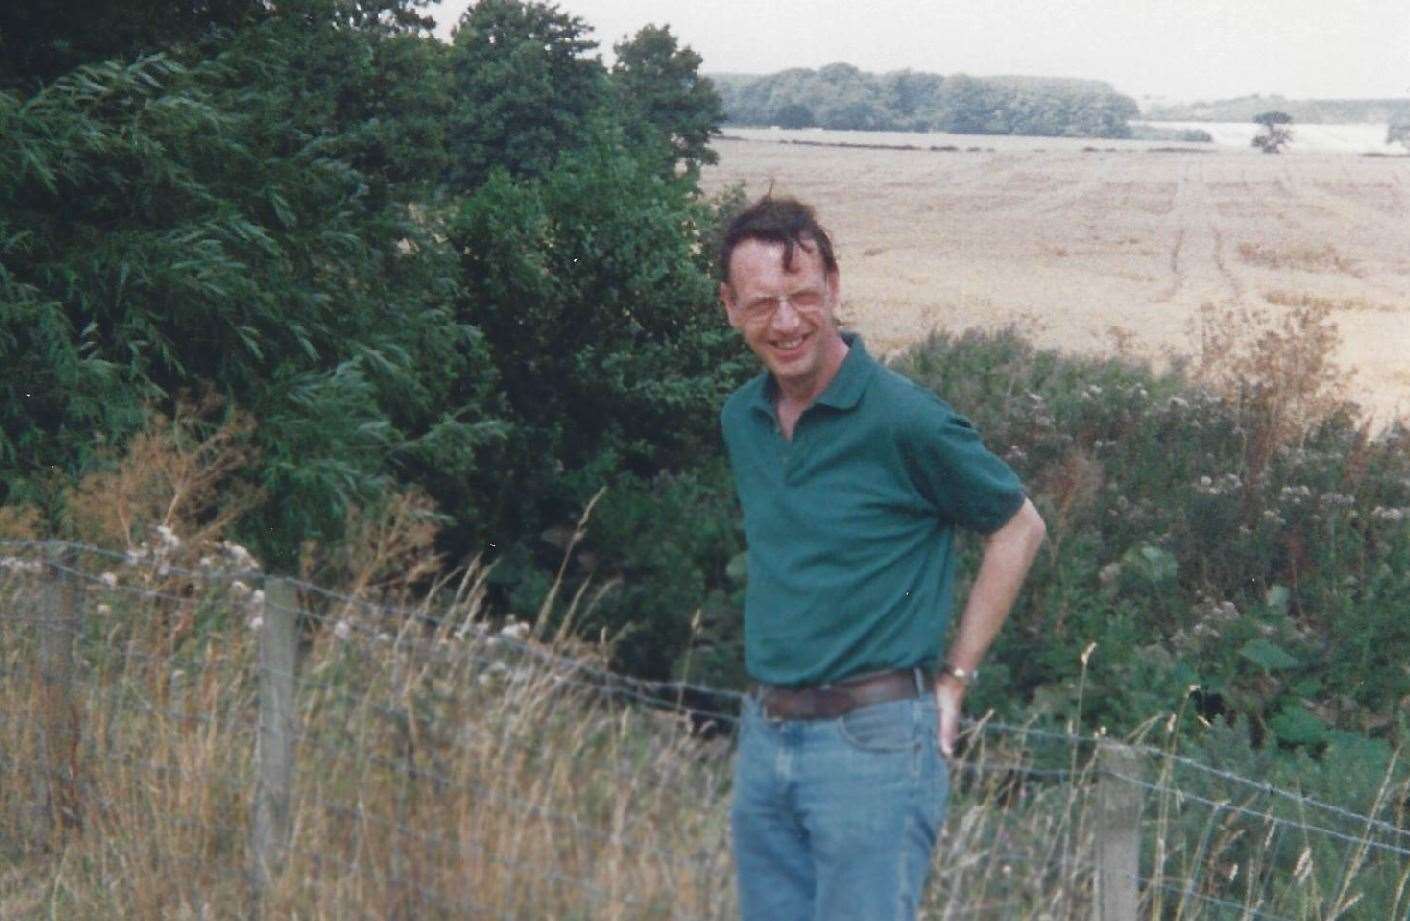 Terry on holiday in 1991